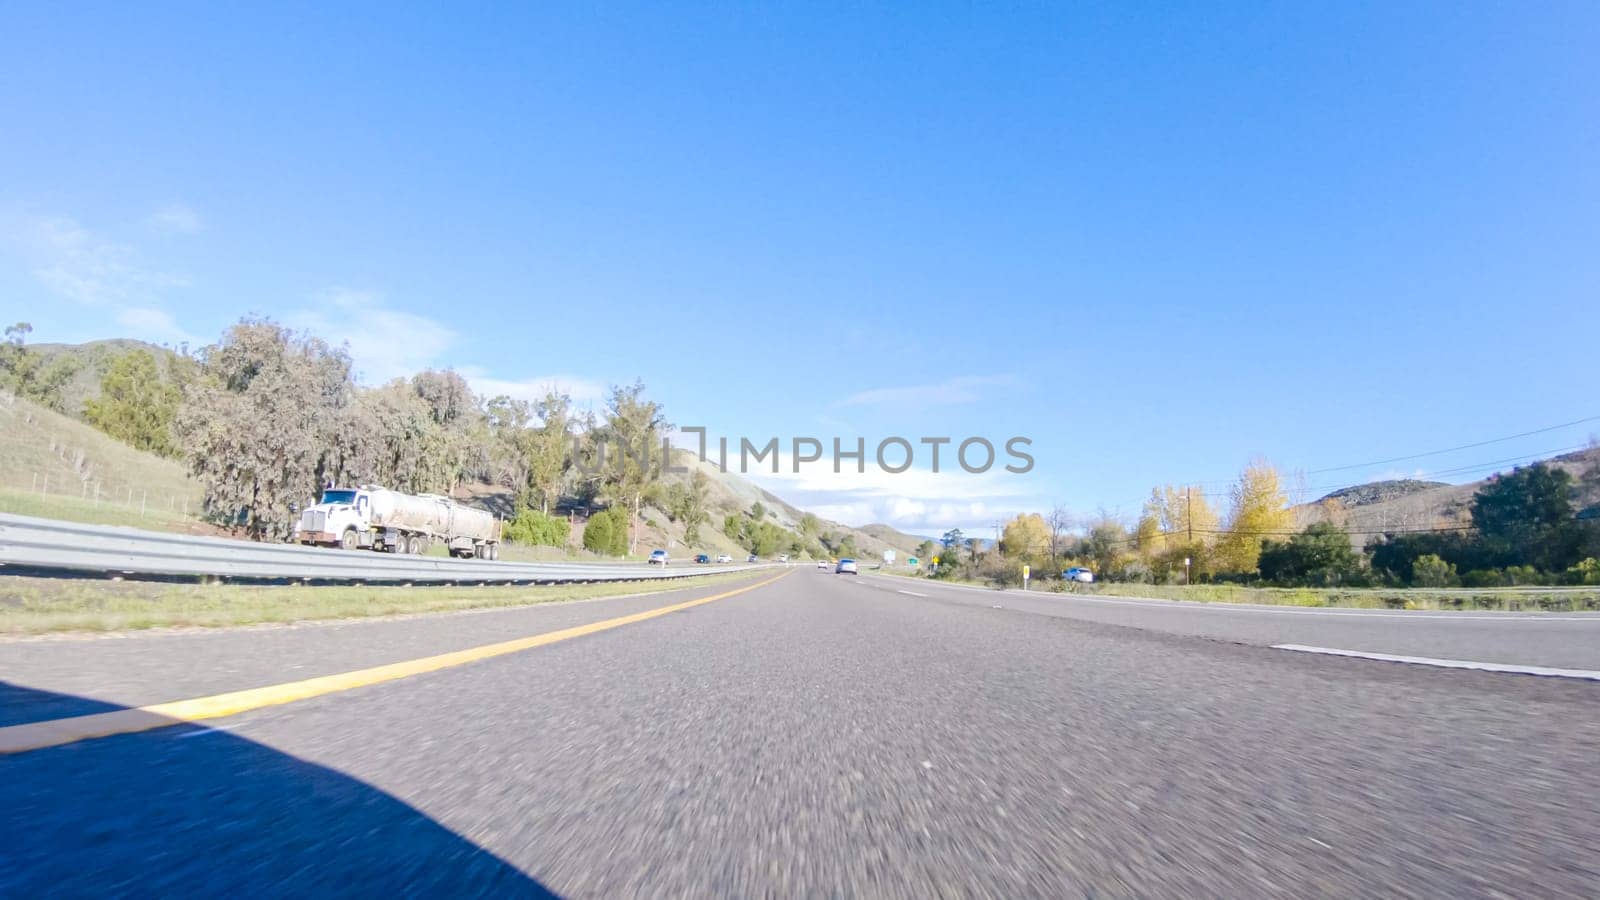 Santa Maria, California, USA-December 6, 2022-On a crisp winter day, a car cruises along the iconic Highway 1 near San Luis Obispo, California. The surrounding landscape is brownish and subdued, with rolling hills and patches of coastal vegetation flanking the winding road.